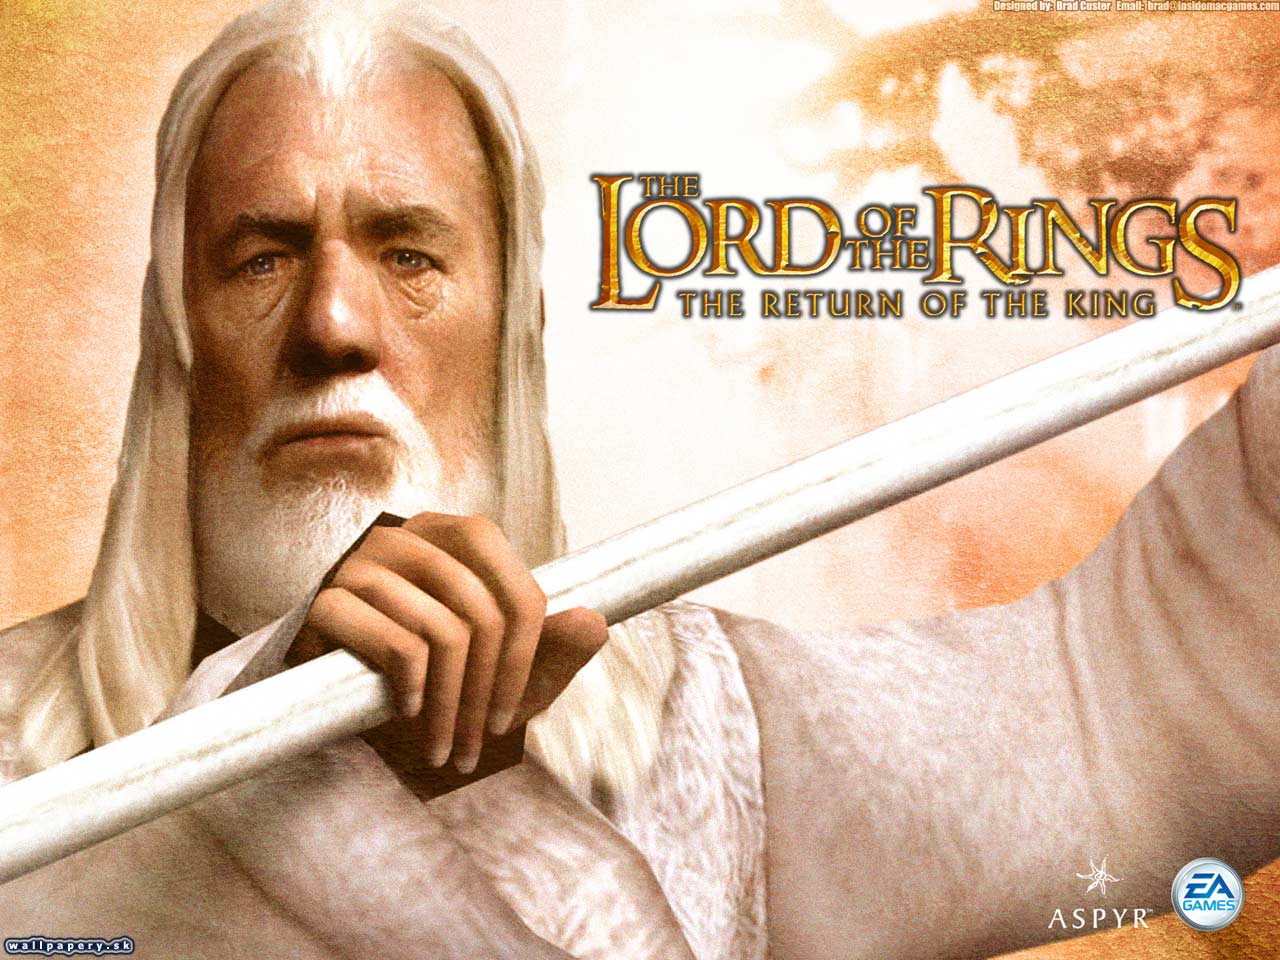 Lord of the Rings: The Return of the King - wallpaper 11